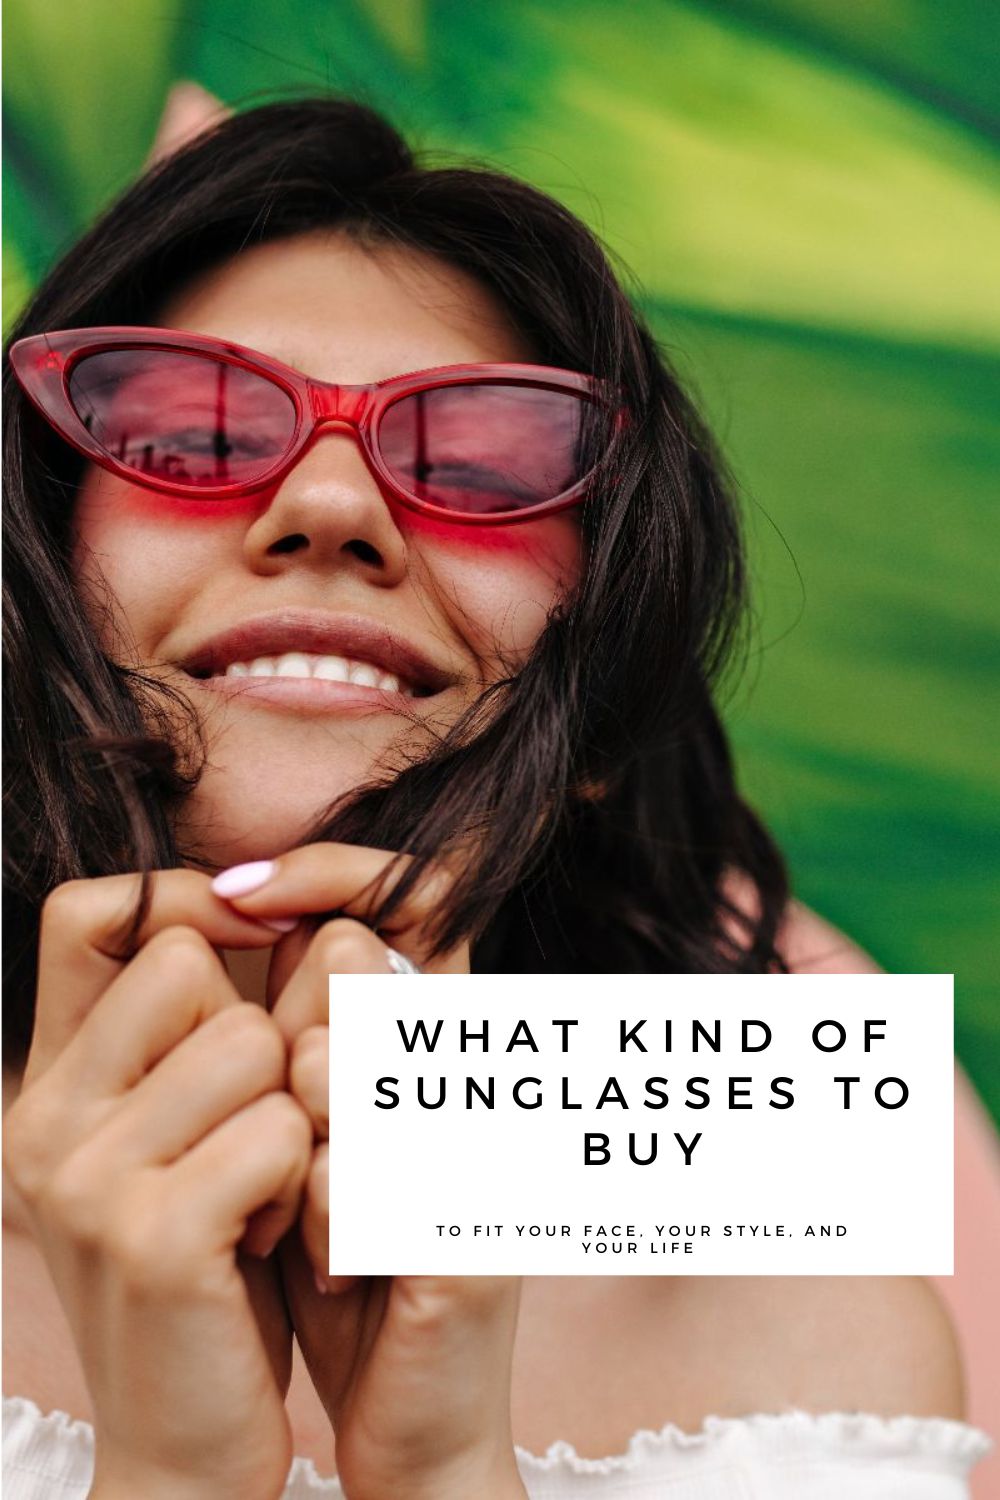 What kind of sunglasses to buy.